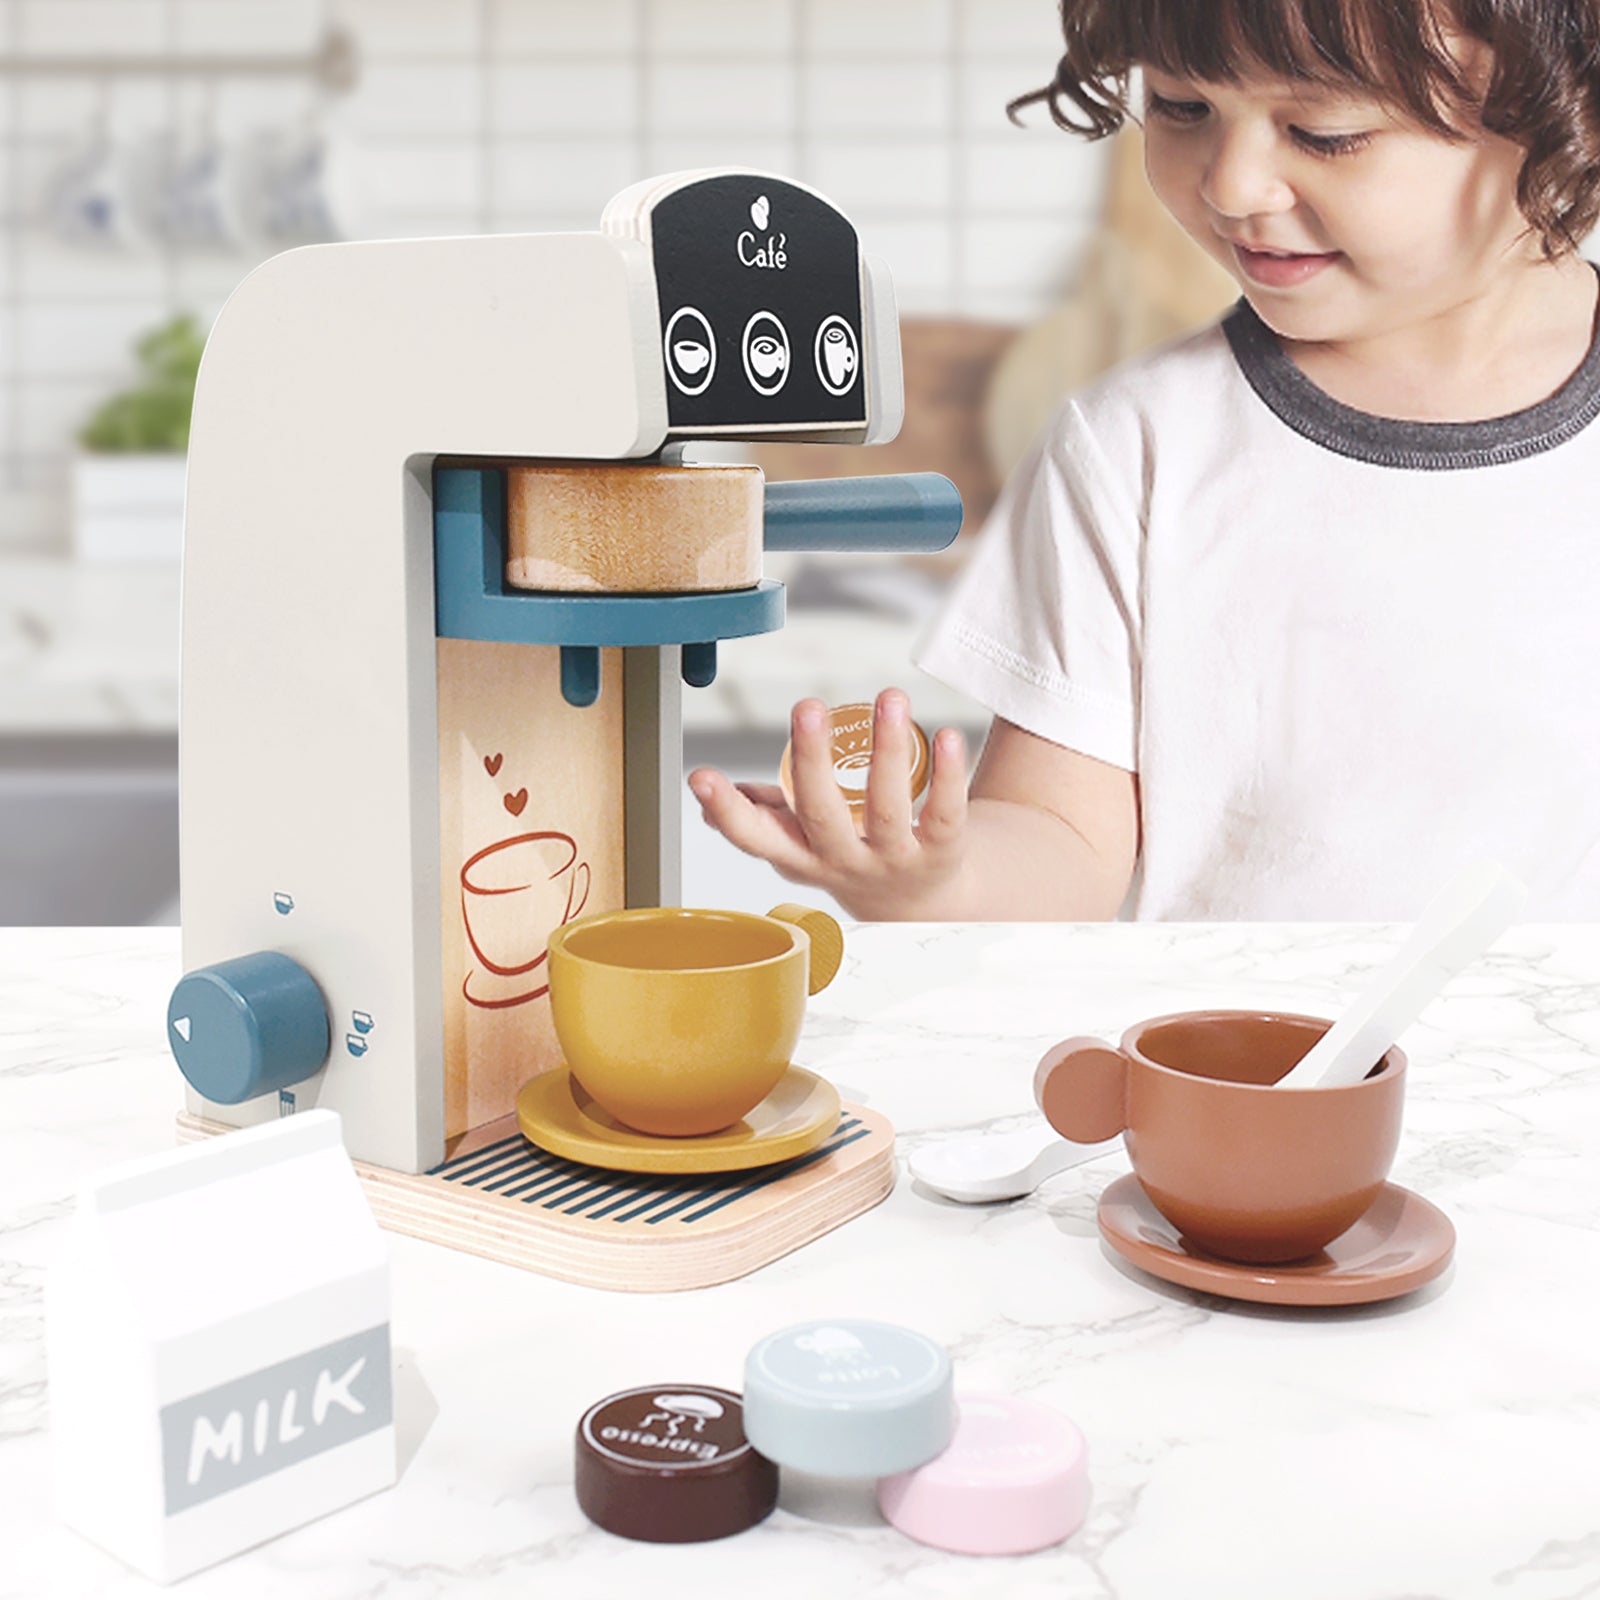 PairPear Kids Wooden Toys Coffee Maker Toy Espresso Machine Playset -  Toddler Play Kitchen Accessories Gift for Girls and Boys